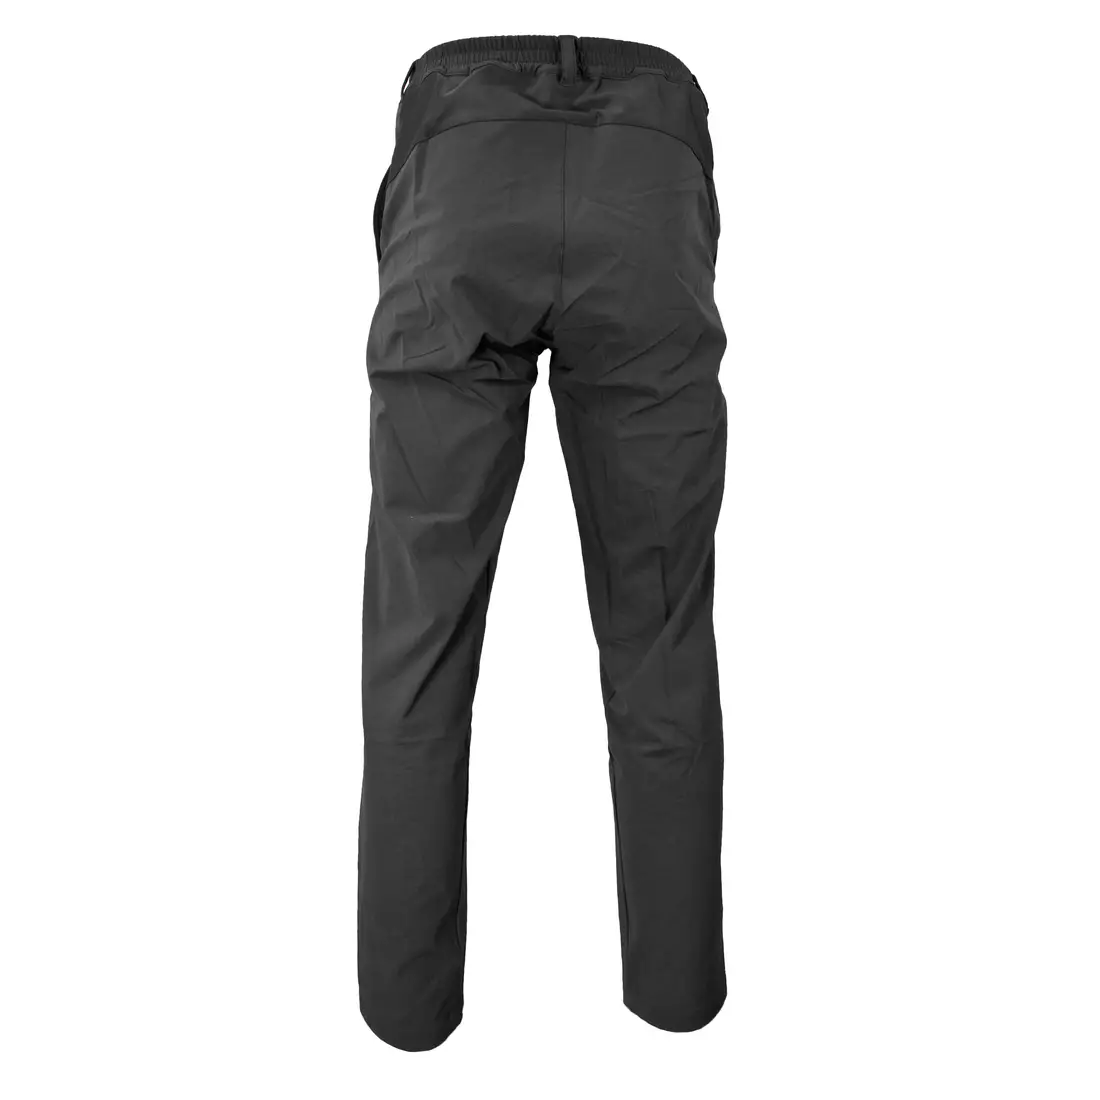 SHIMANO CWPATWLS16UL Insulated Comfort Pants – isolierte Radhose